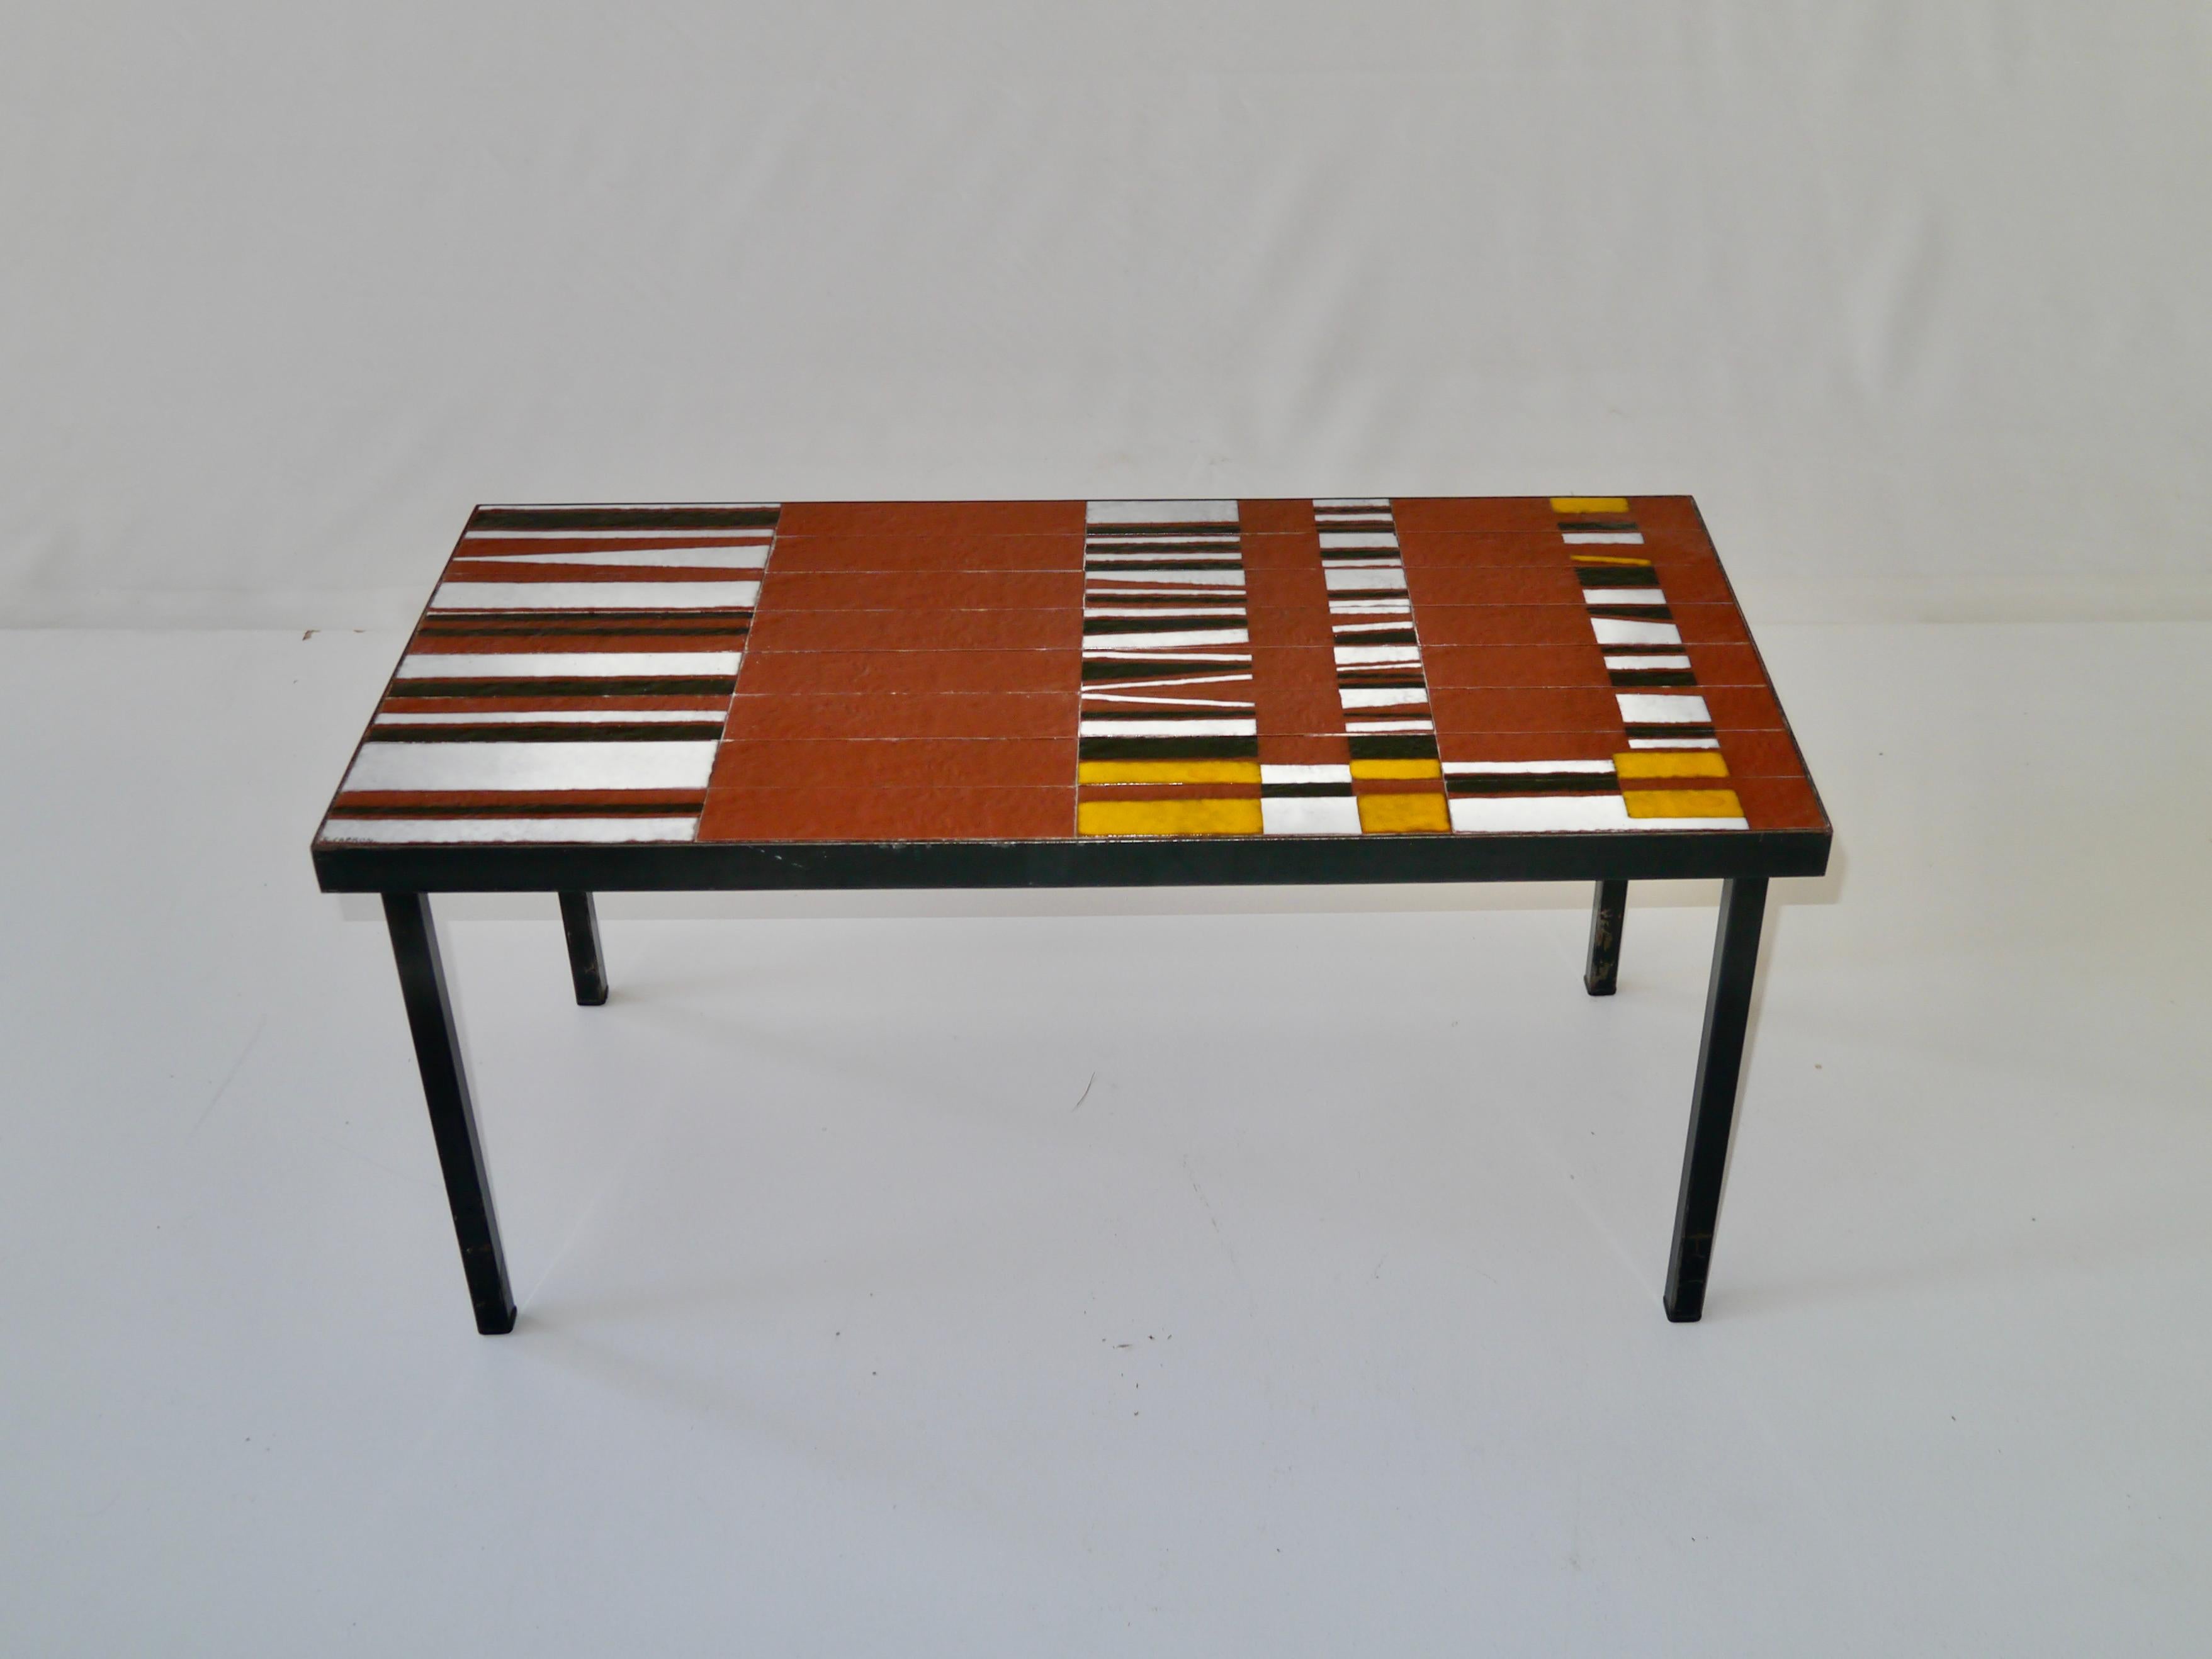 French Ceramic Low Table, Roger Capron, Vallauris c. 1960 For Sale